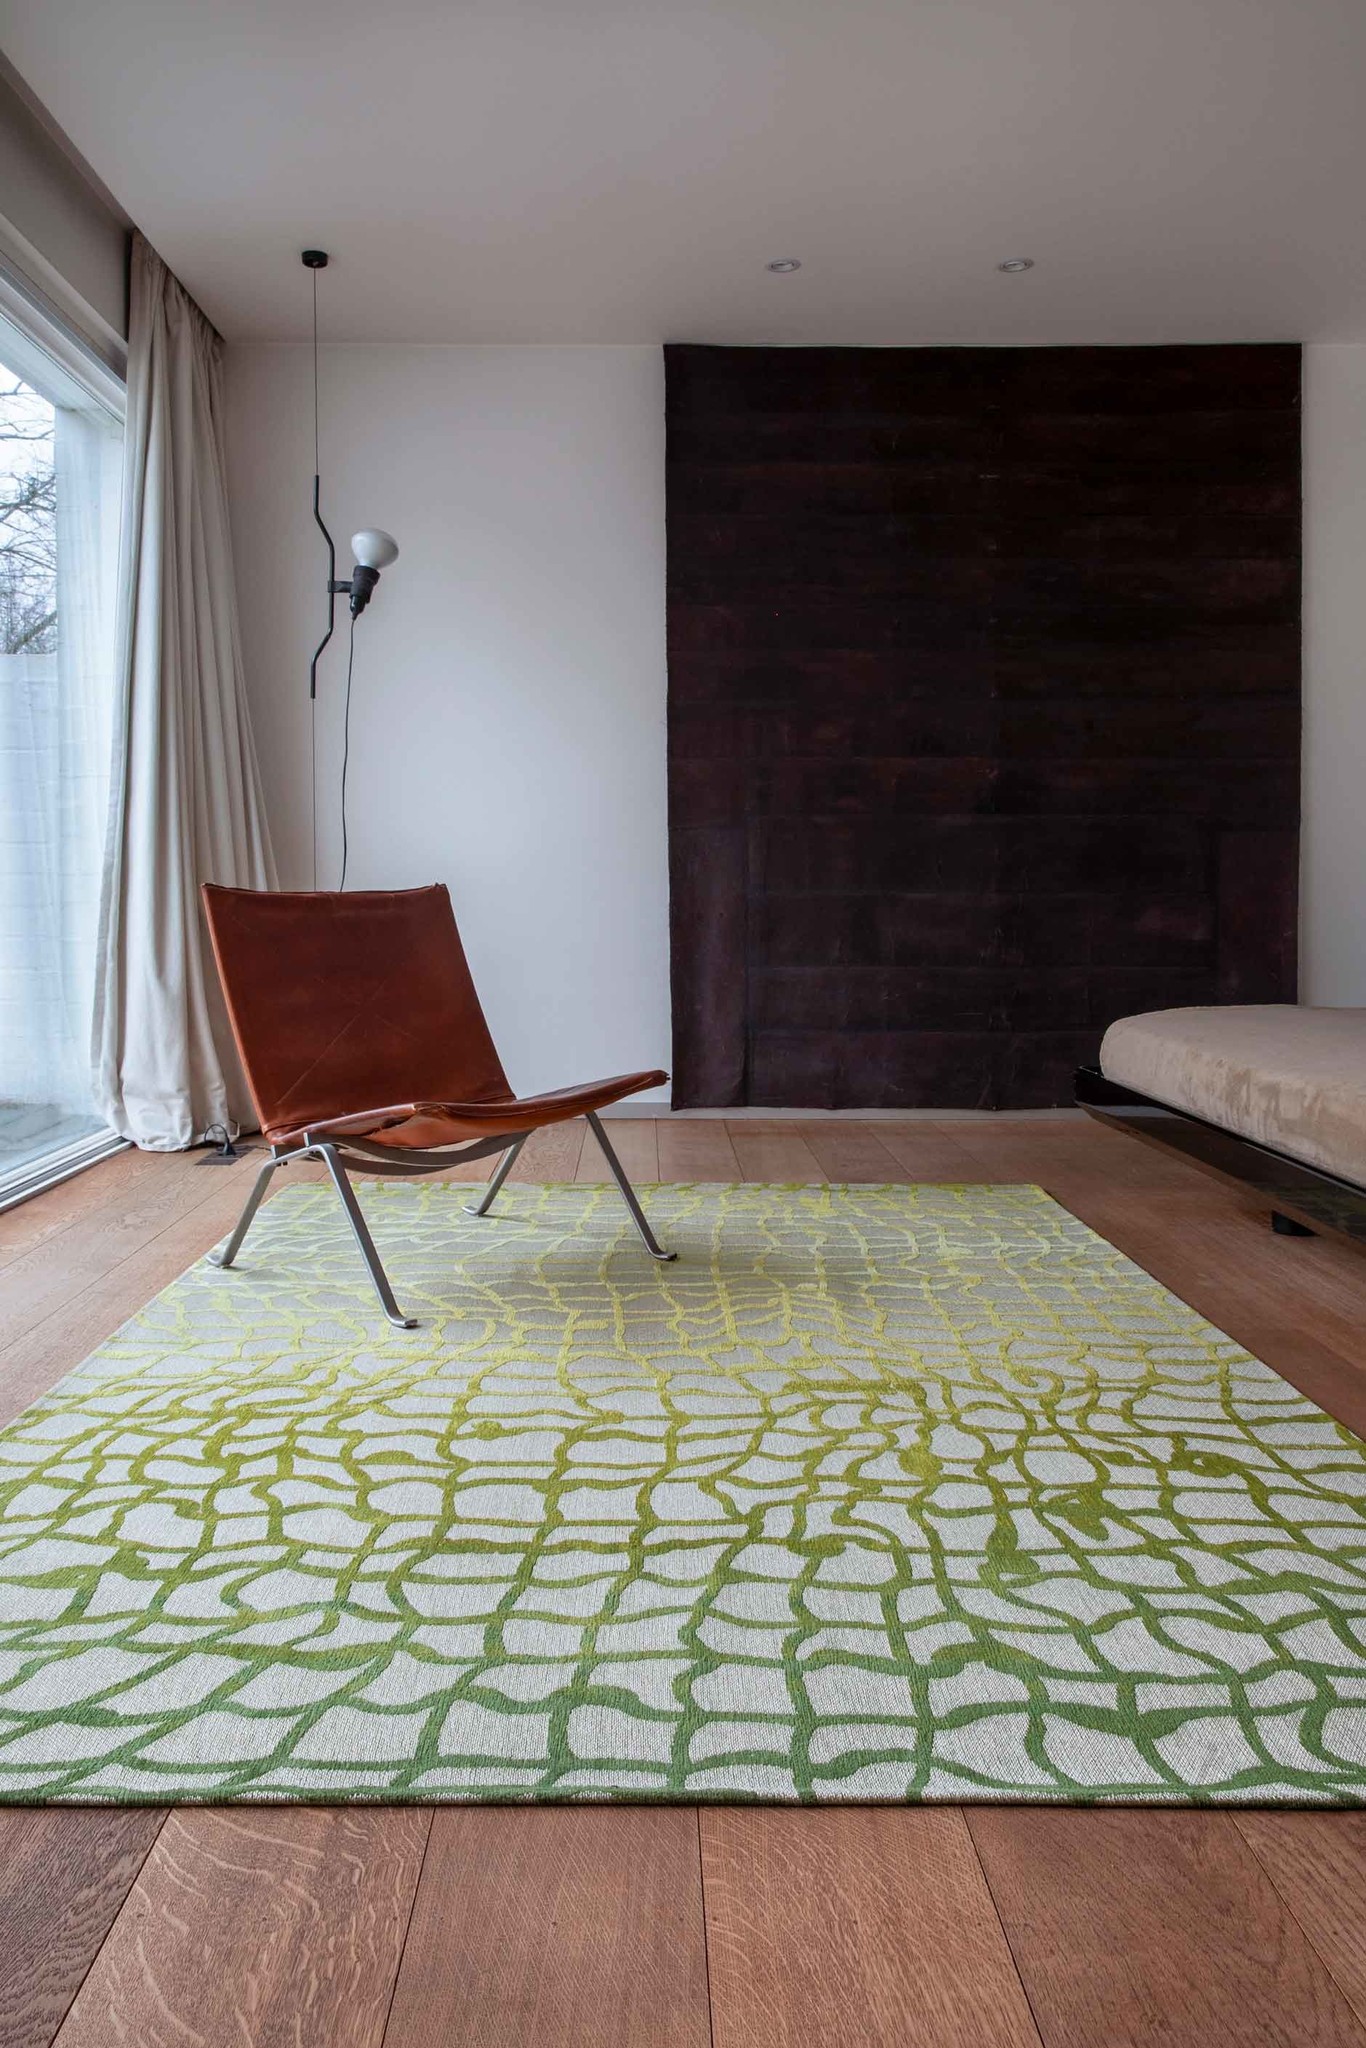 Green Flatwoven Rug ☞ Size: 2' 7" x 5' (80 x 150 cm)